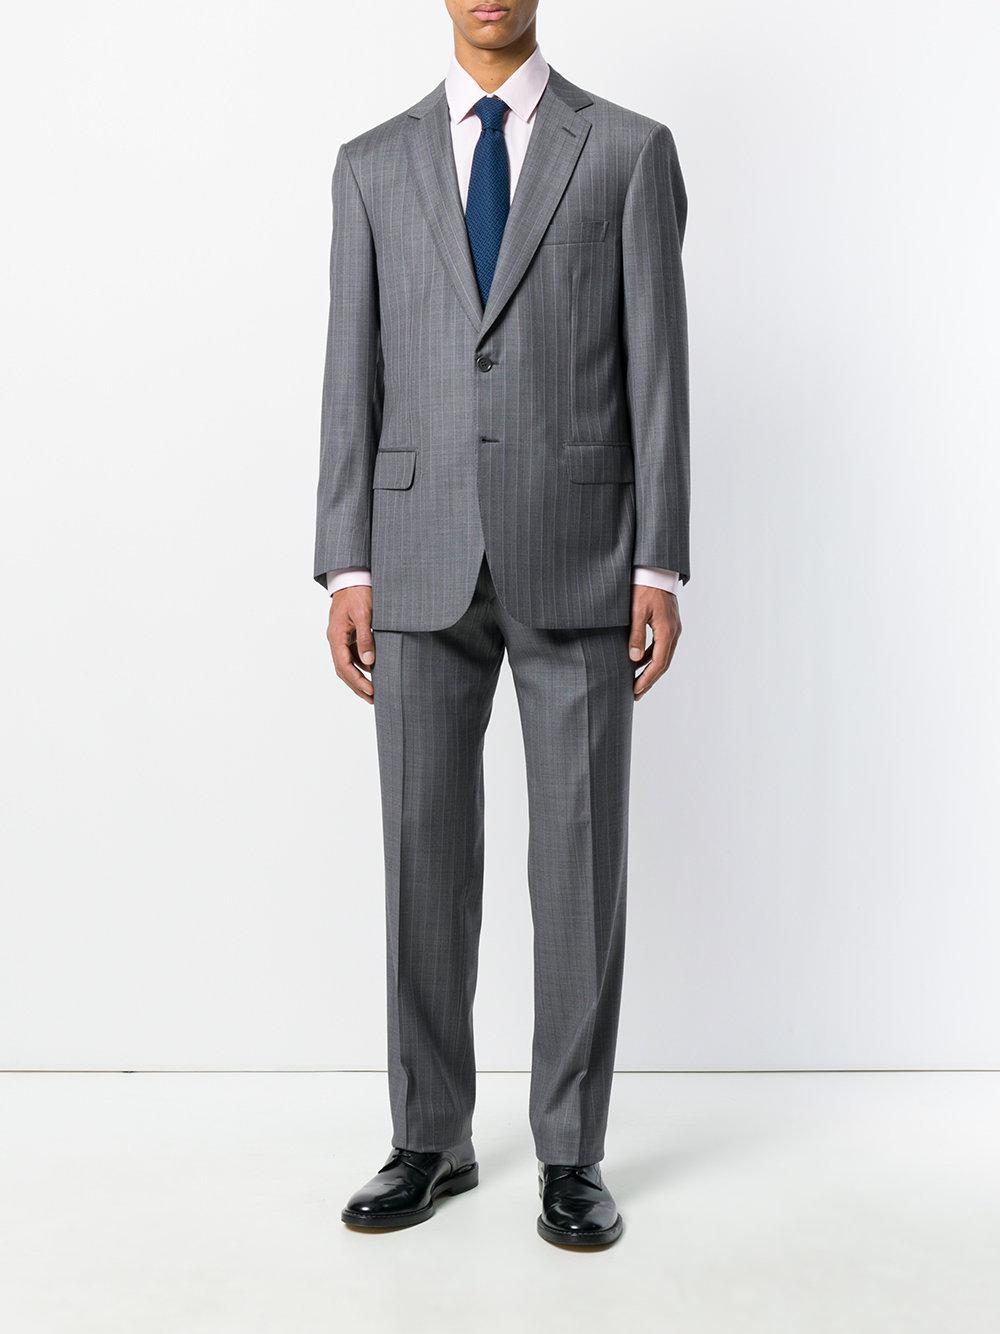 Brioni Brunico Solid Two-piece Suit - Navy | Editorialist